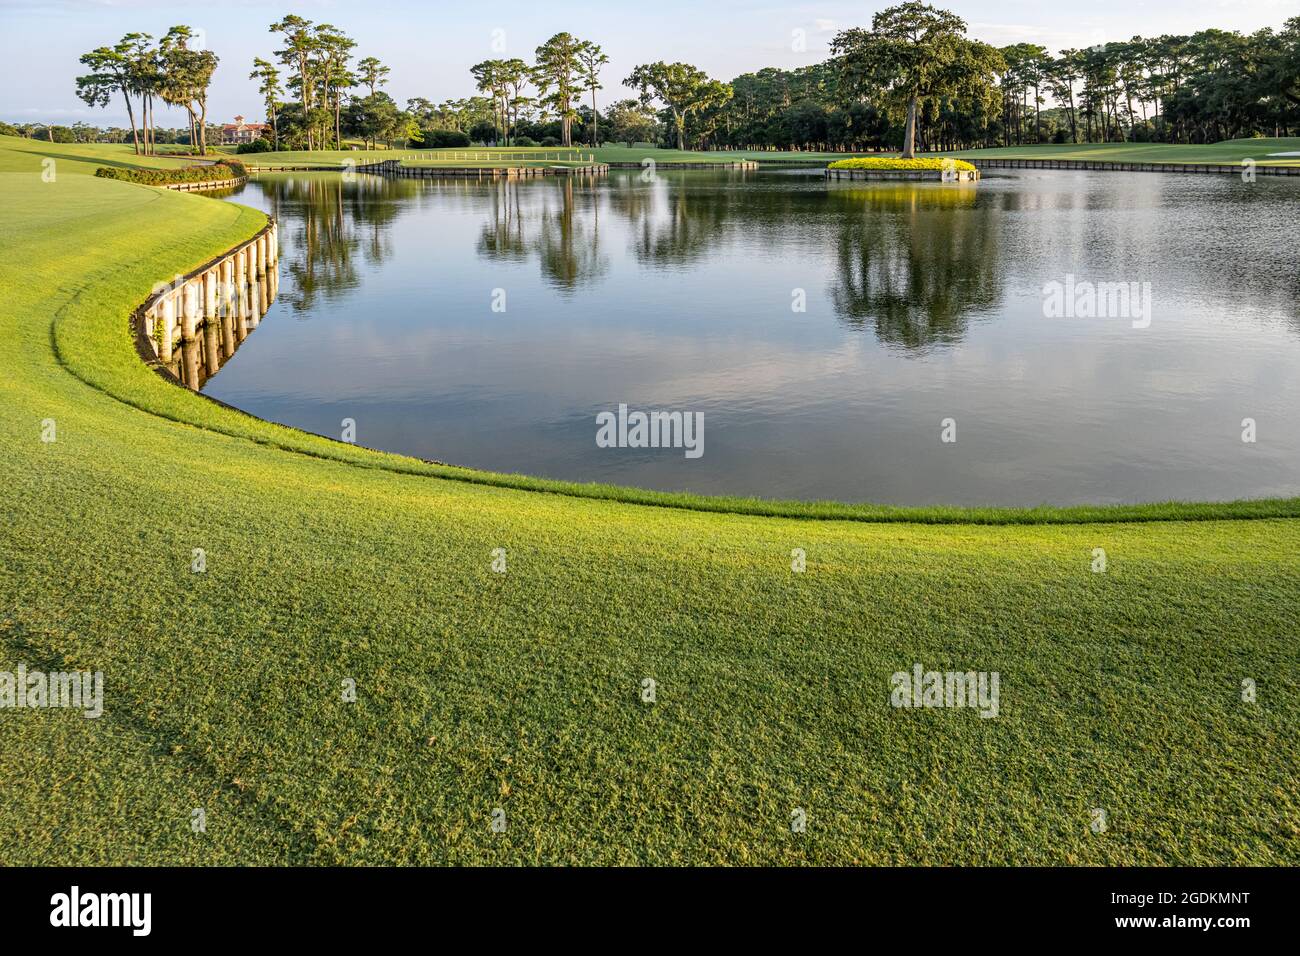 View of the world famous 17th Island Green from the tee box at TPC Sawgrass, home of THE PLAYERS golf tournament in Ponte Vedra Beach, Florida. (USA) Stock Photo